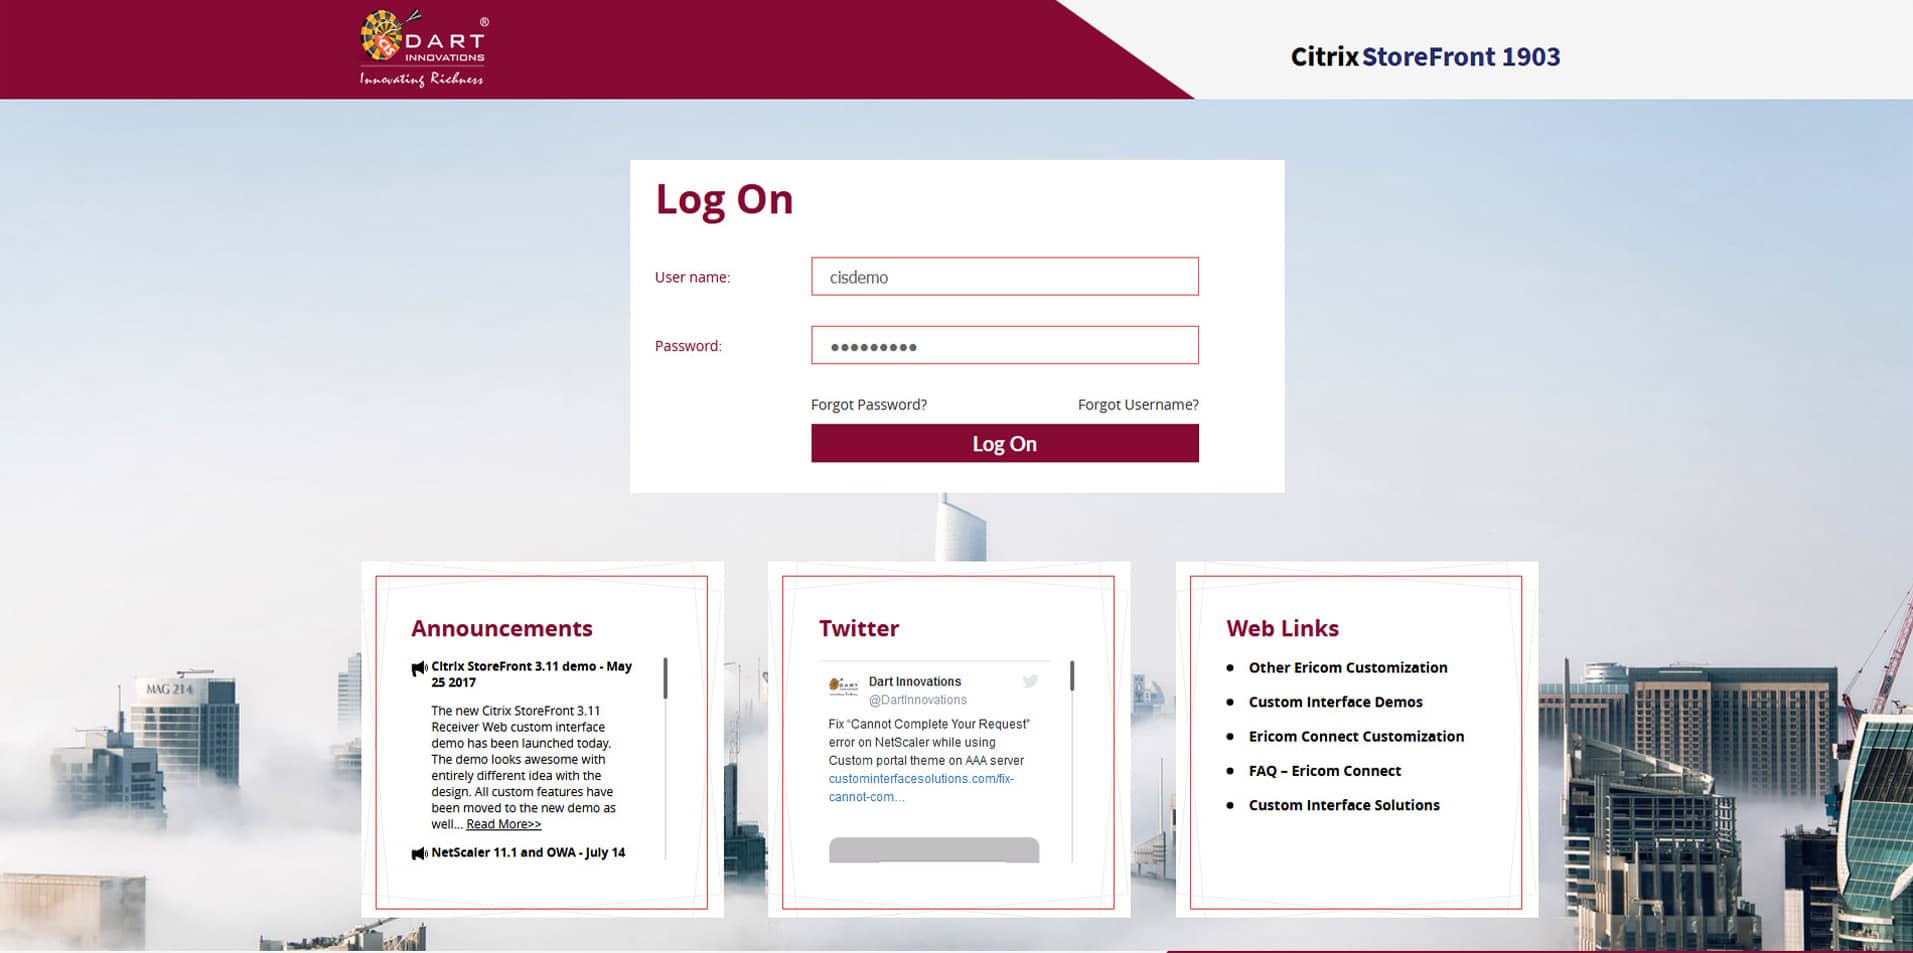 Citrix StoreFront 1903 customization demo has been up and running.